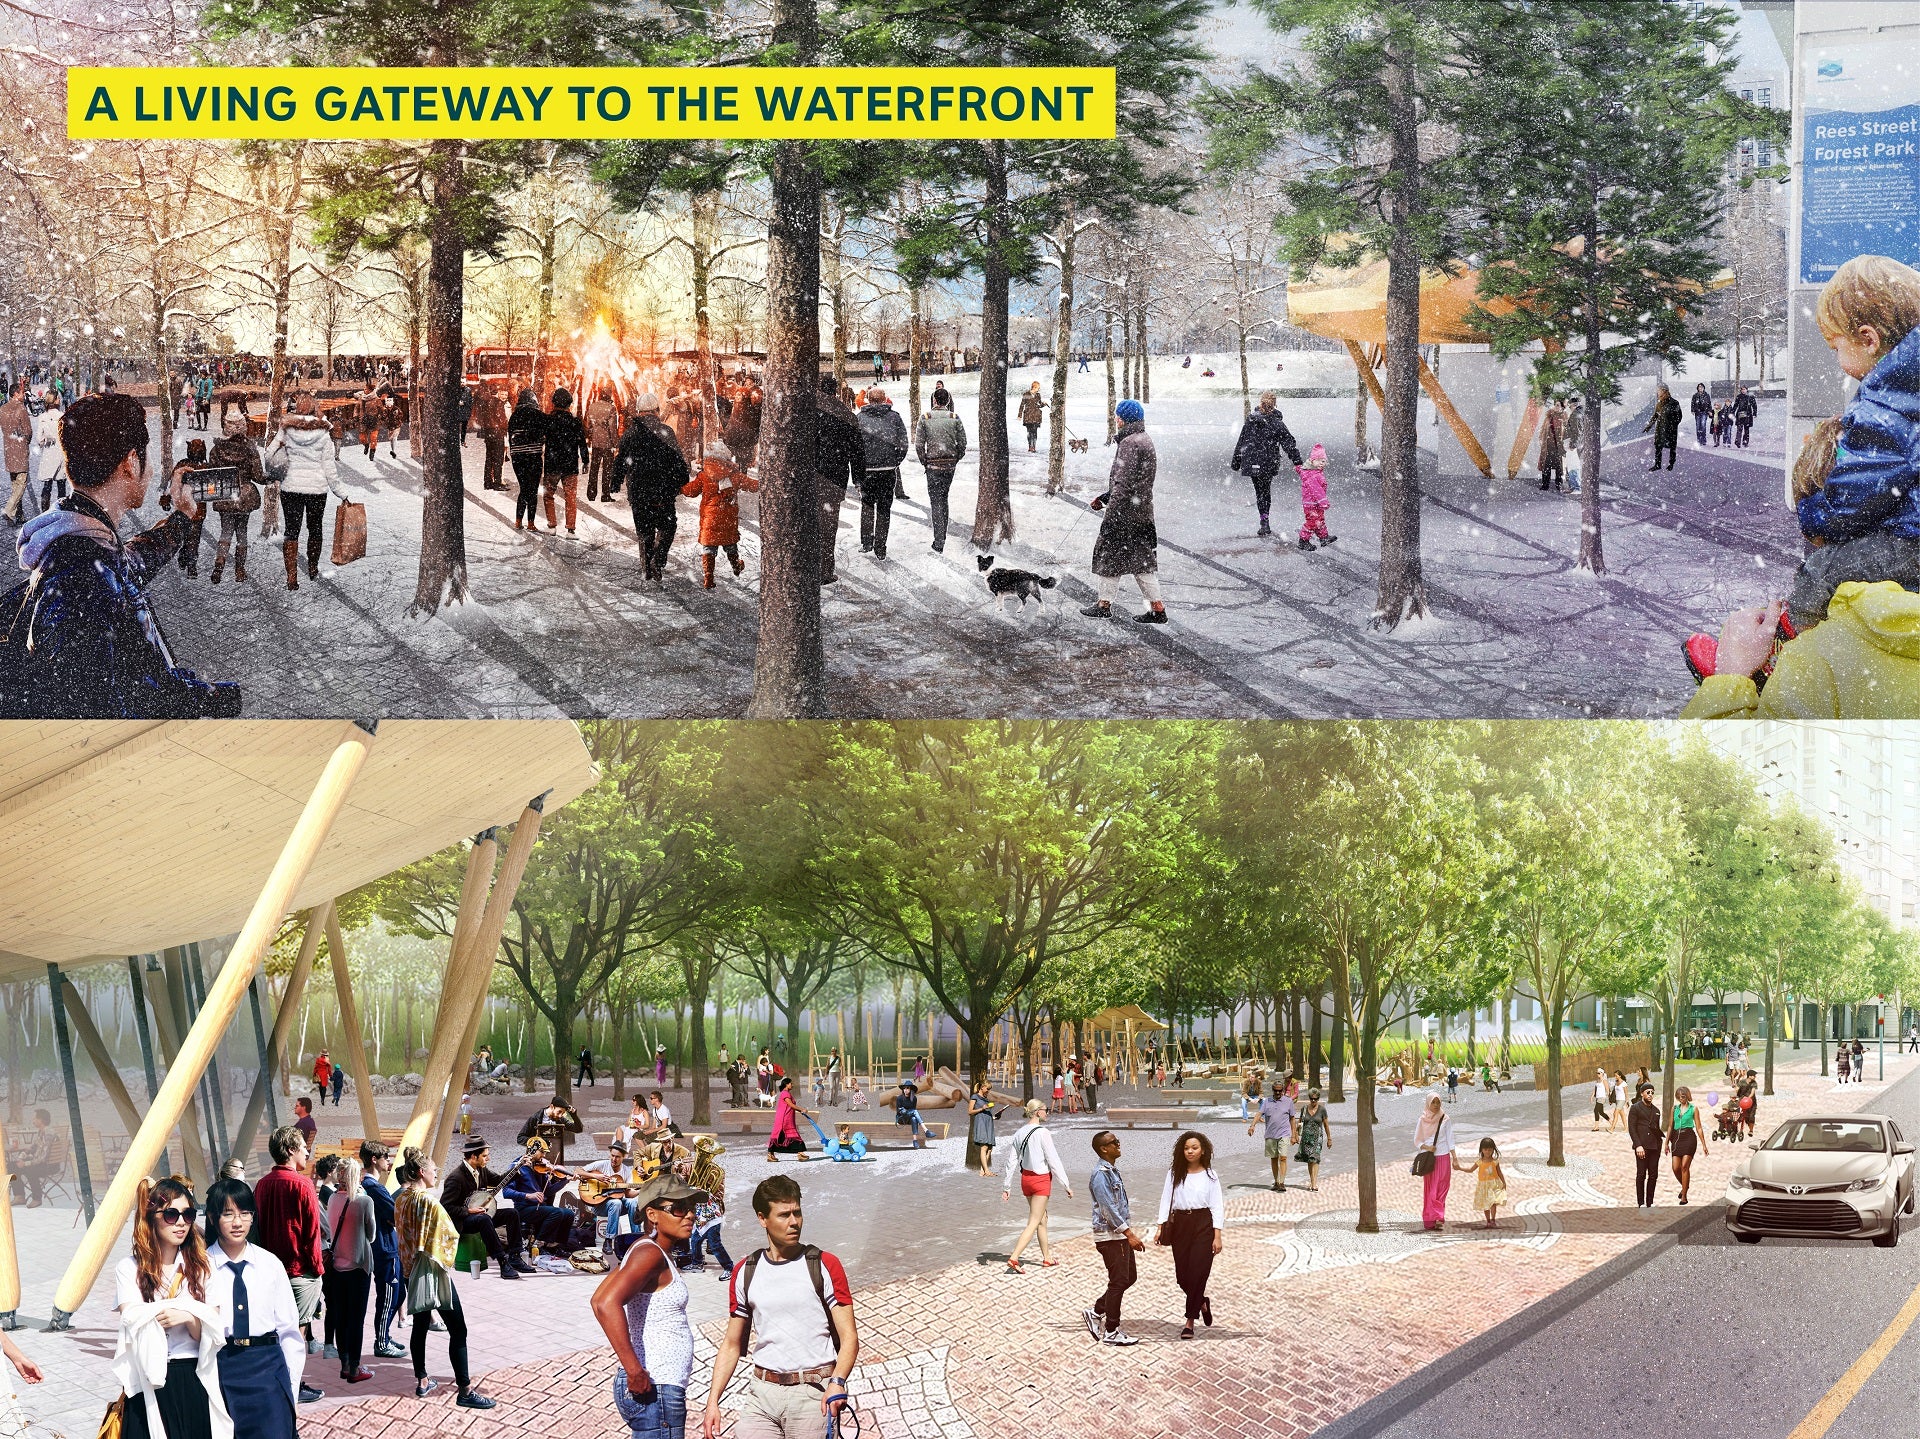 Rees Street Free Forest, by SCAPE Landscape Architecture (New York) + BSN Architects (Toronto)